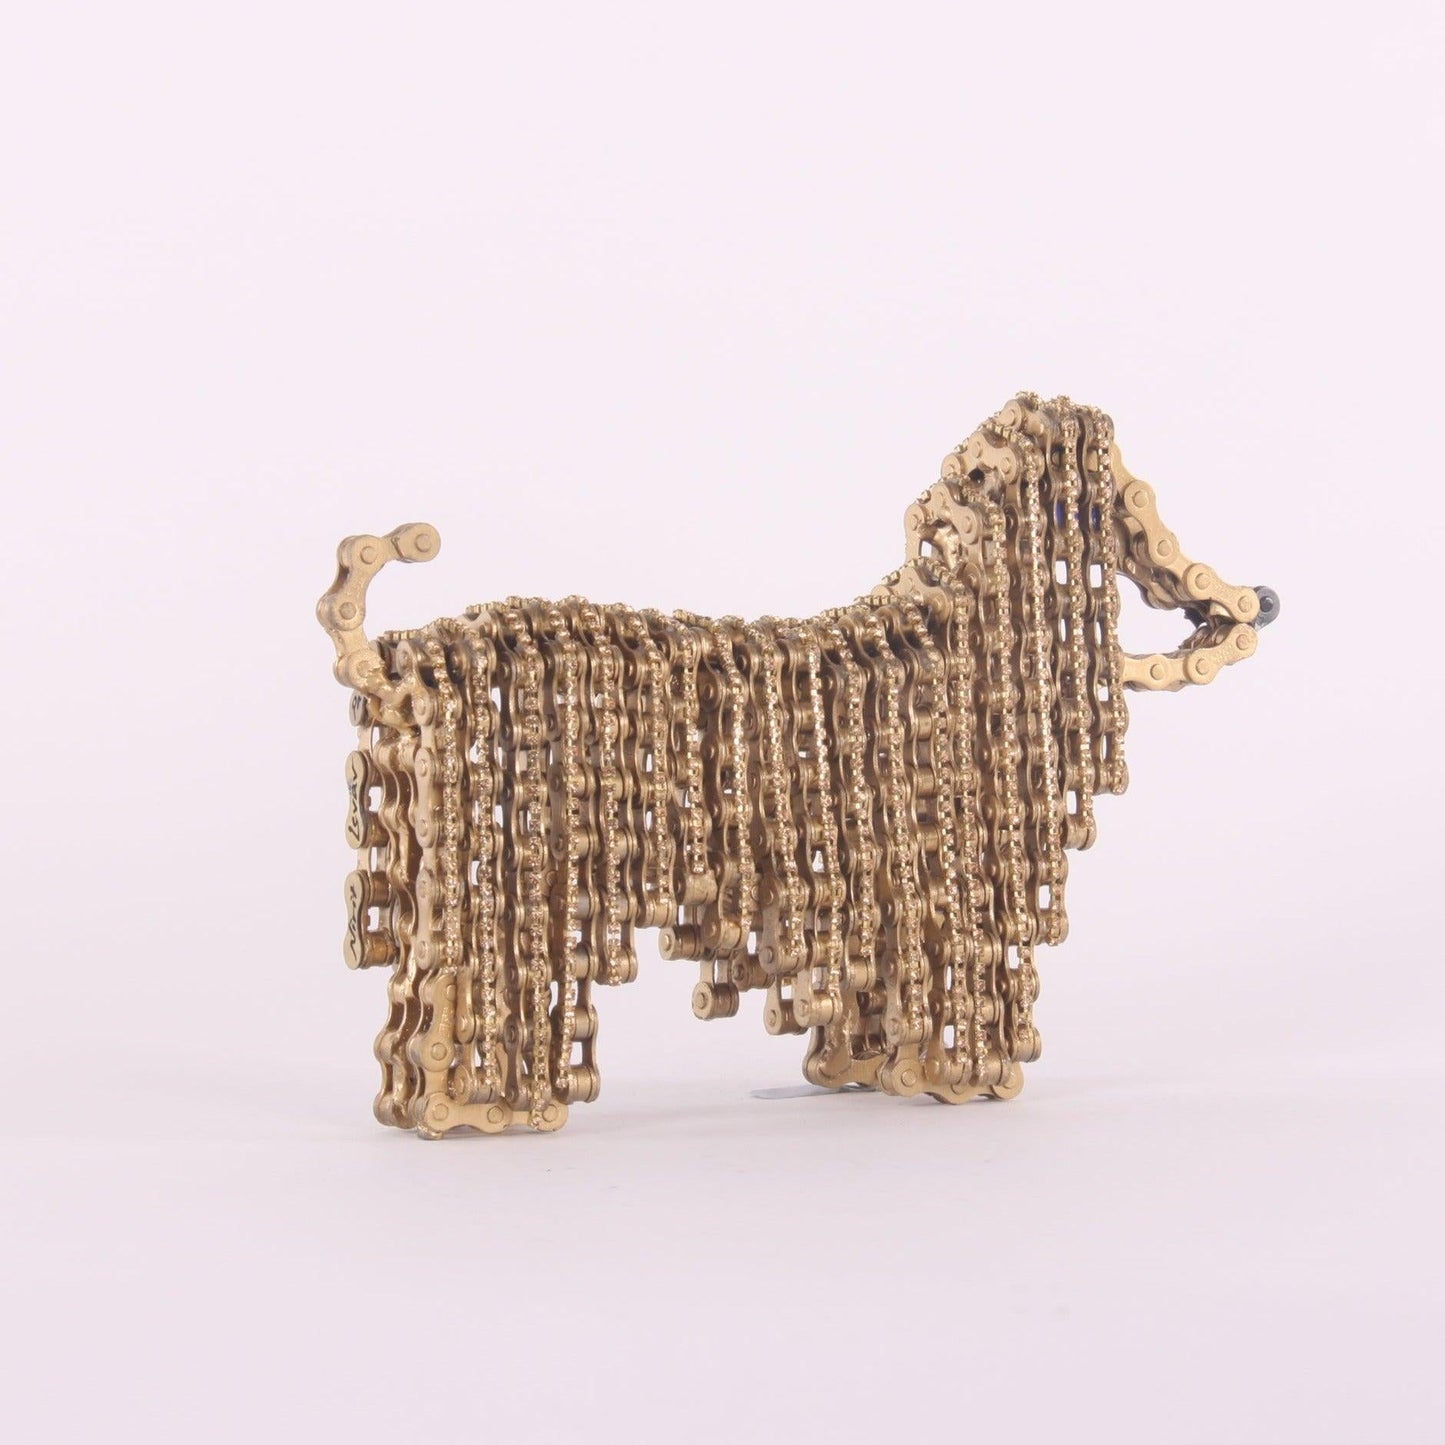 Afghan Hound Sculpture (Princess Gold) | UNCHAINED by NIRIT LEVAV PACKER